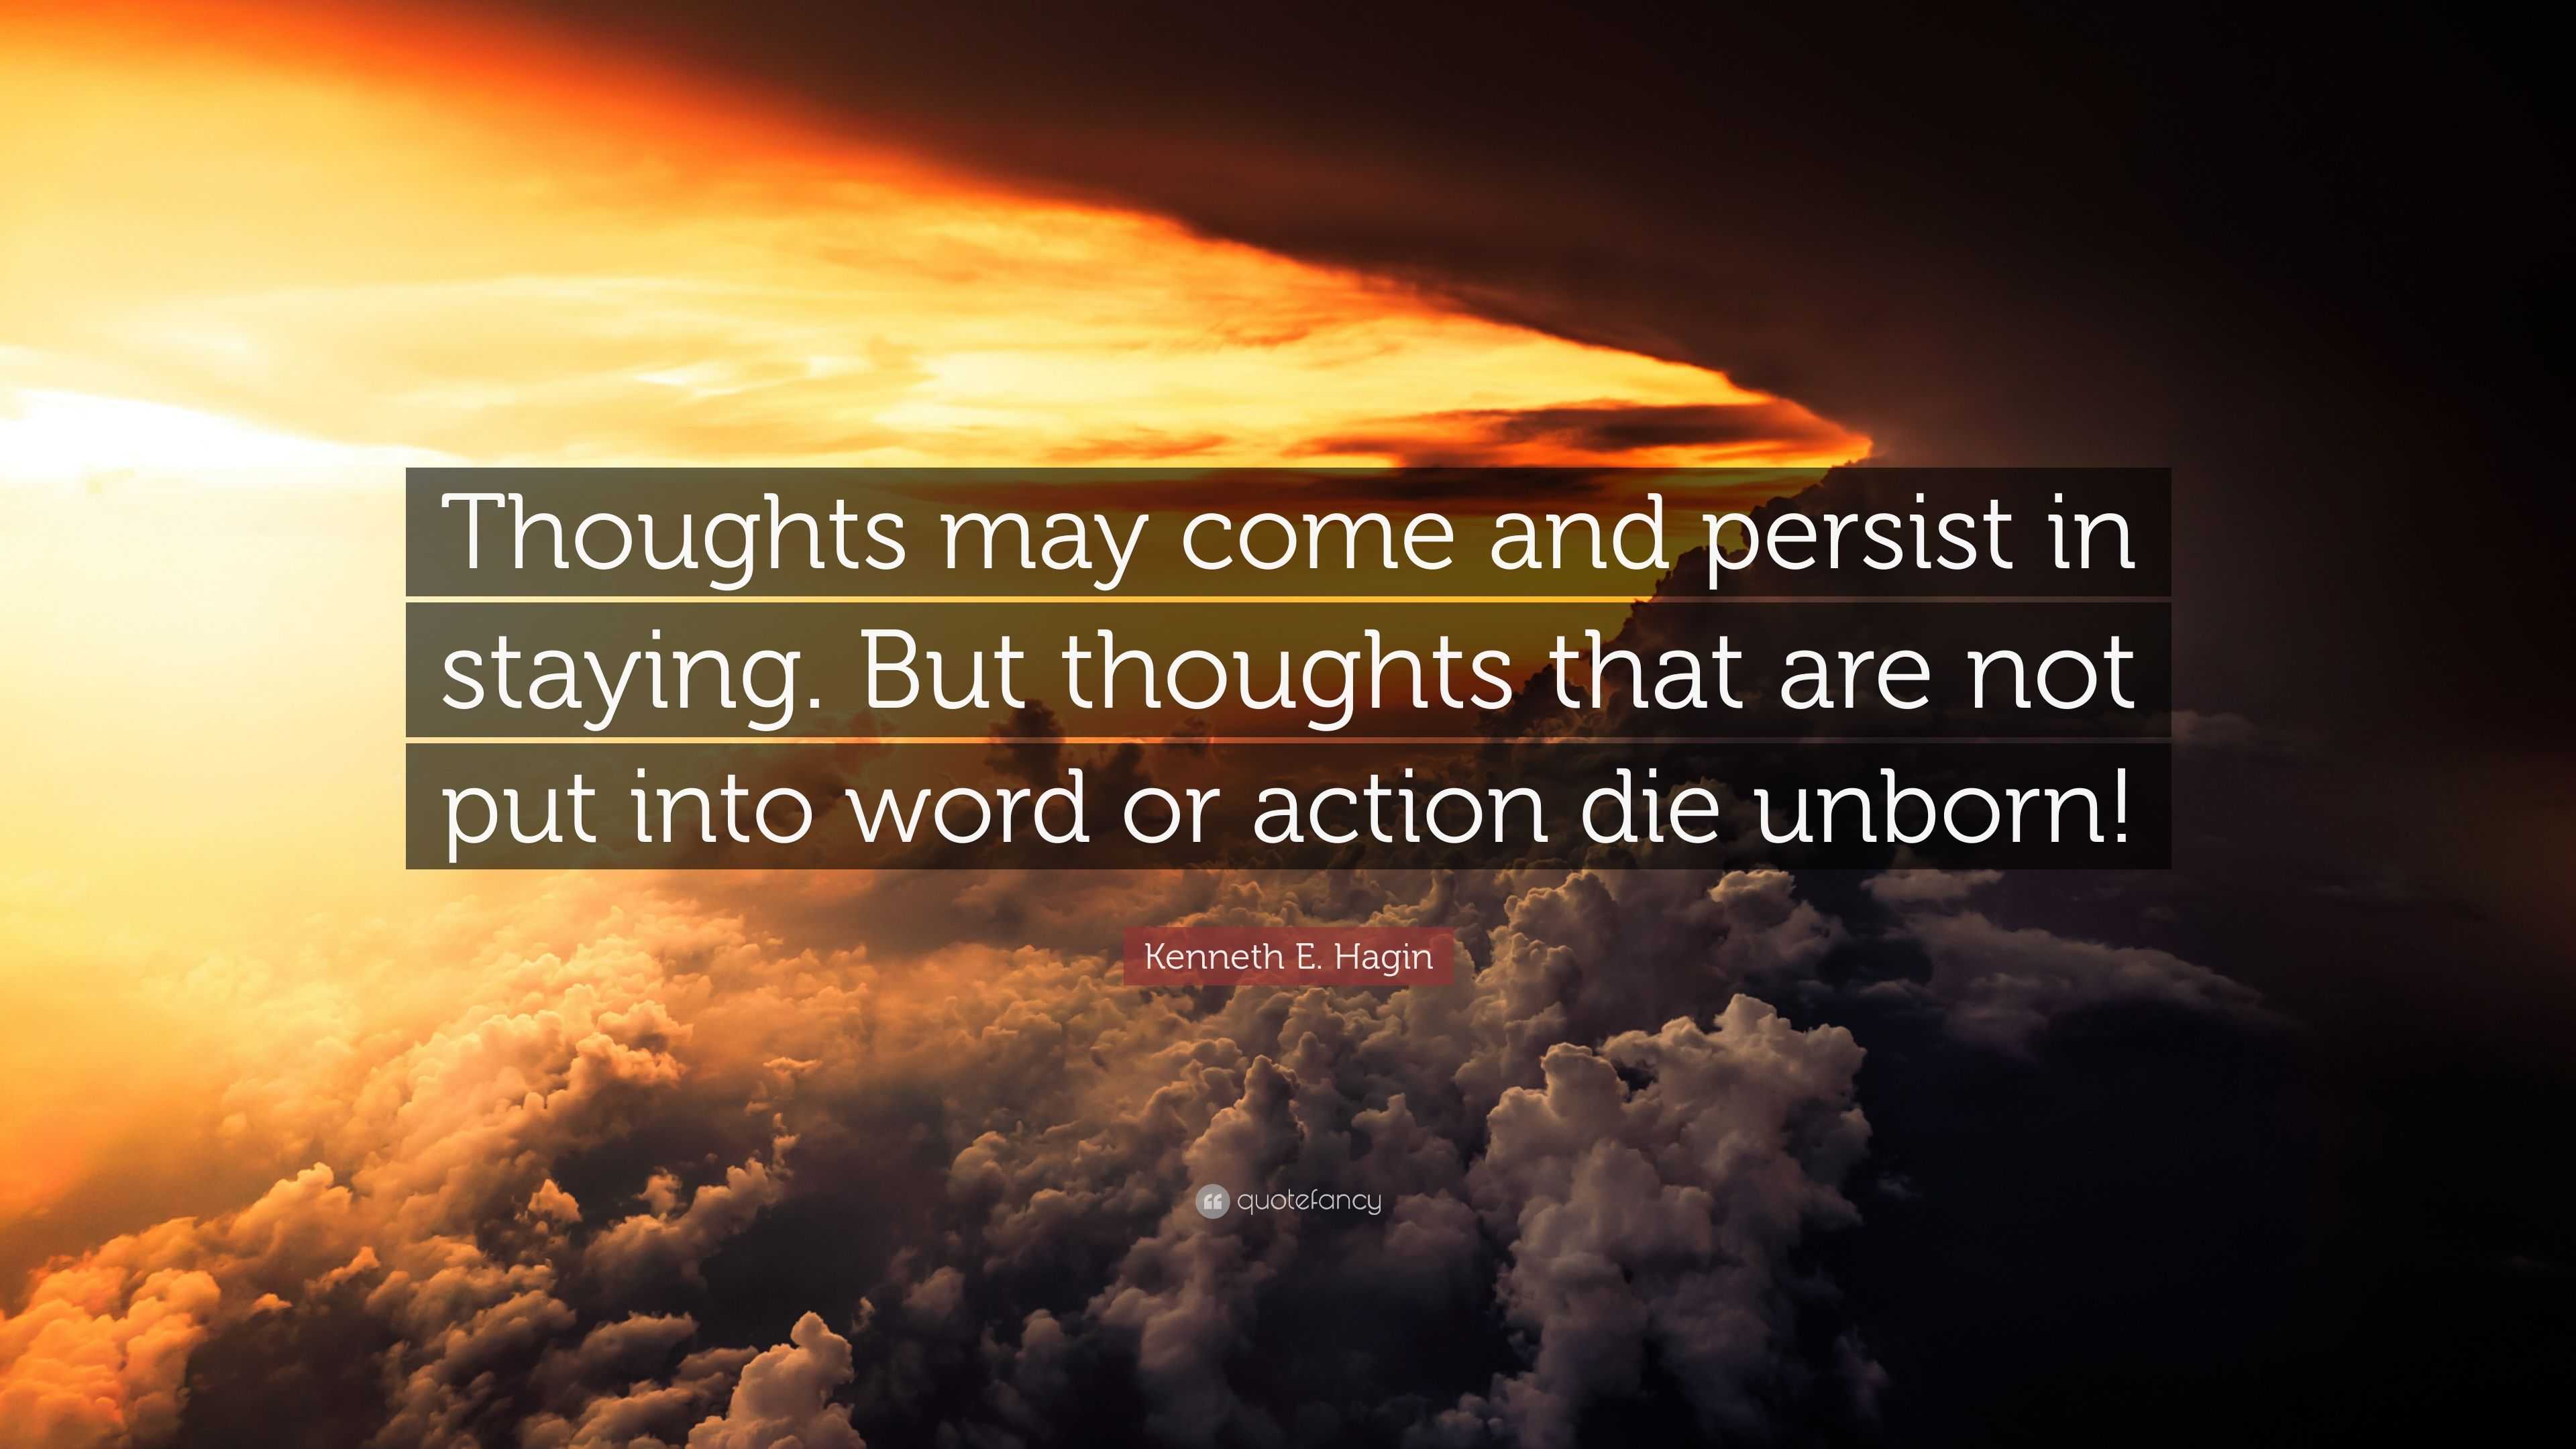 Kenneth E. Hagin Quote: “Thoughts may come and persist in staying. But ...